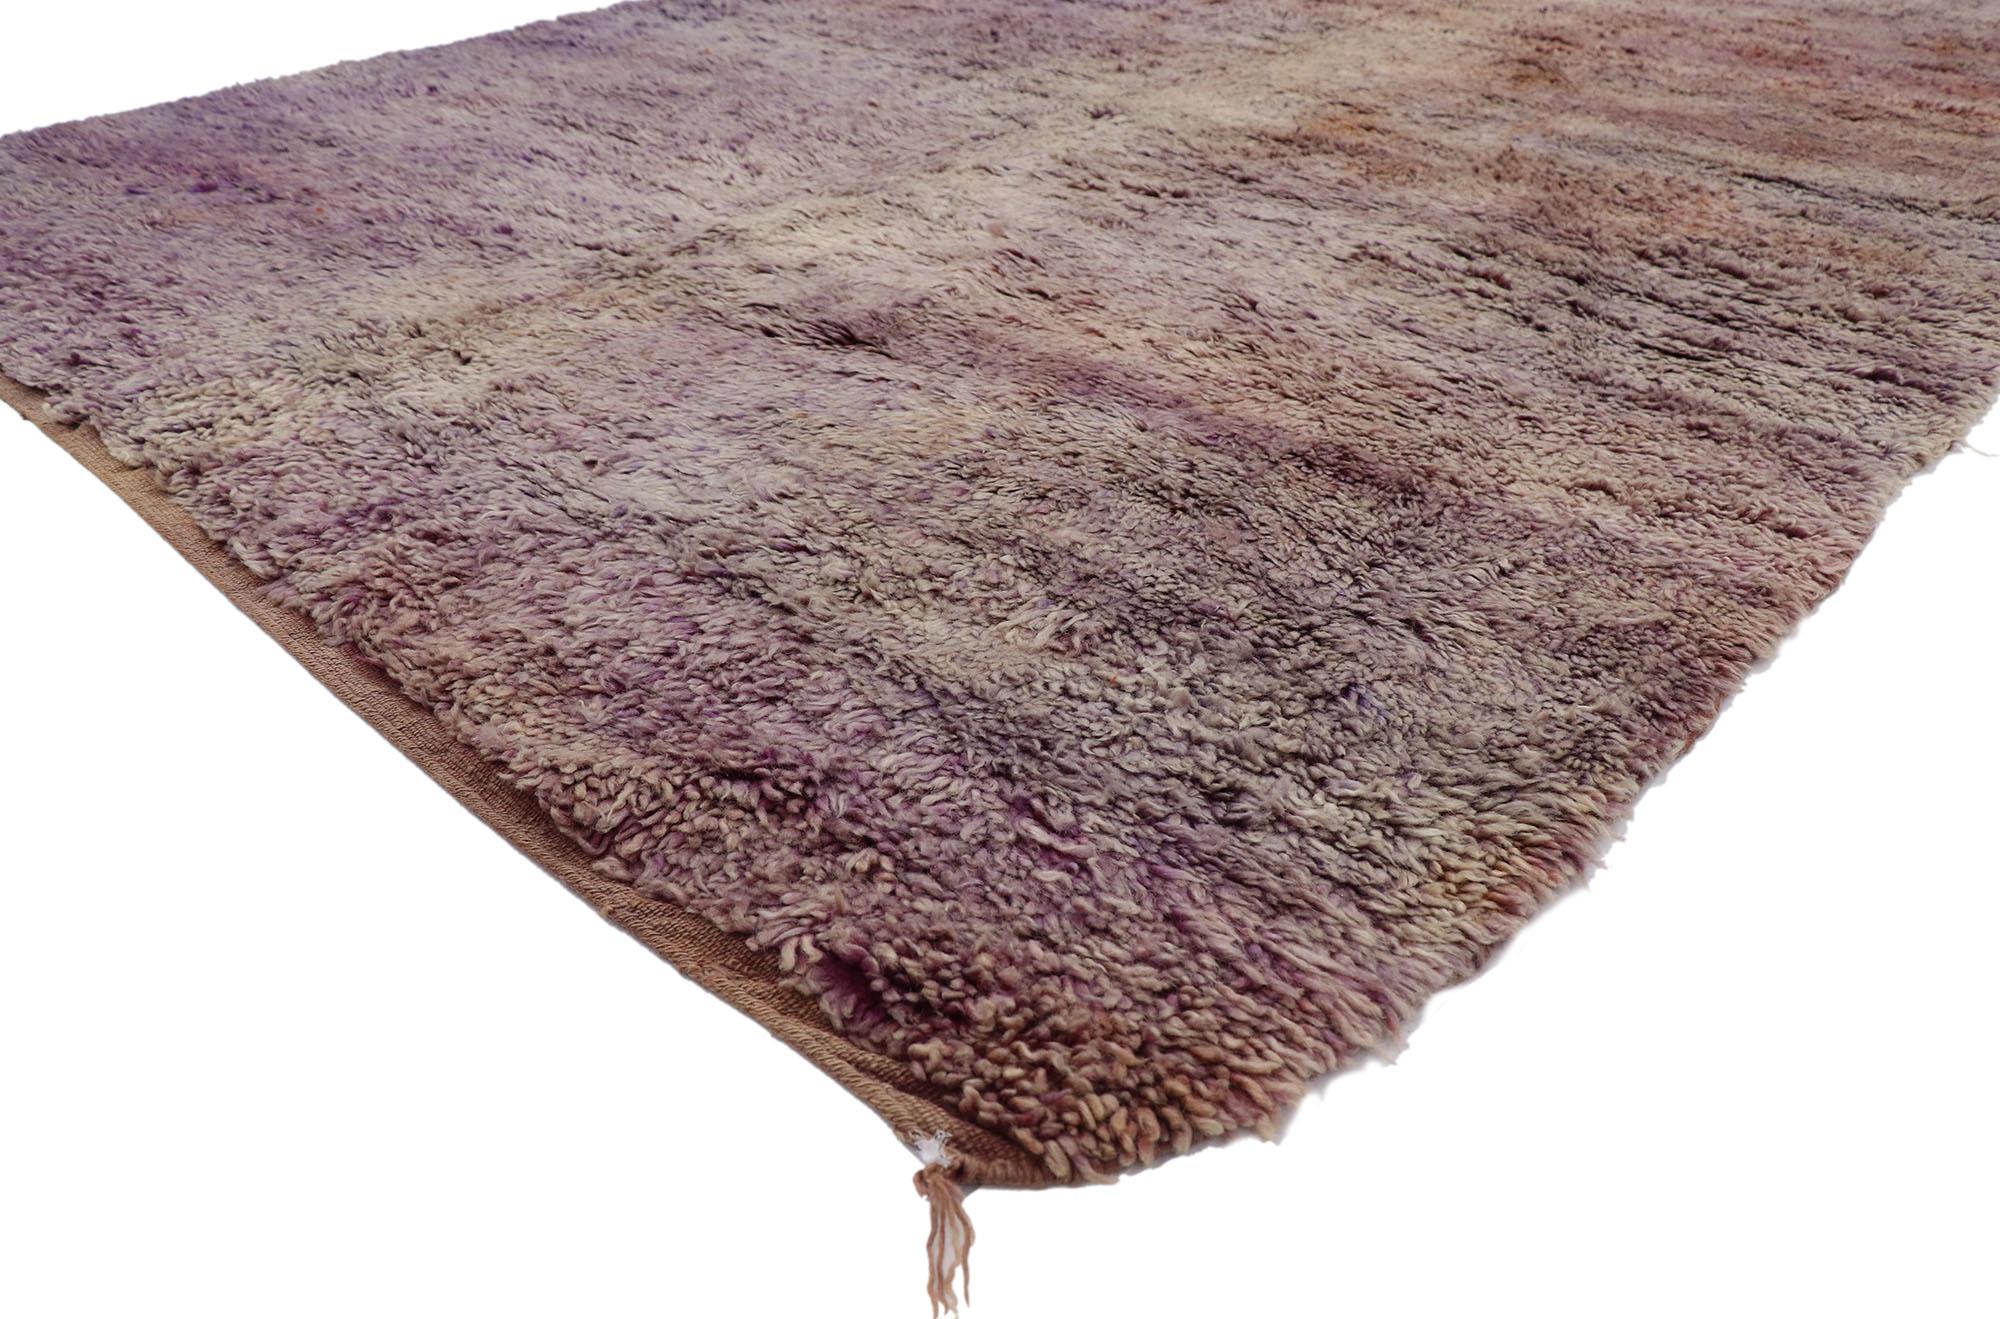 21474 Vintage Berber Beni Mrirt Moroccan rug with Bohemian Style 07'02 x 10'05. With its simplicity, plush pile and Bohemian vibes, this hand knotted wool vintage Berber Beni Mrirt Moroccan rug is a captivating vision of woven beauty. Imbued with